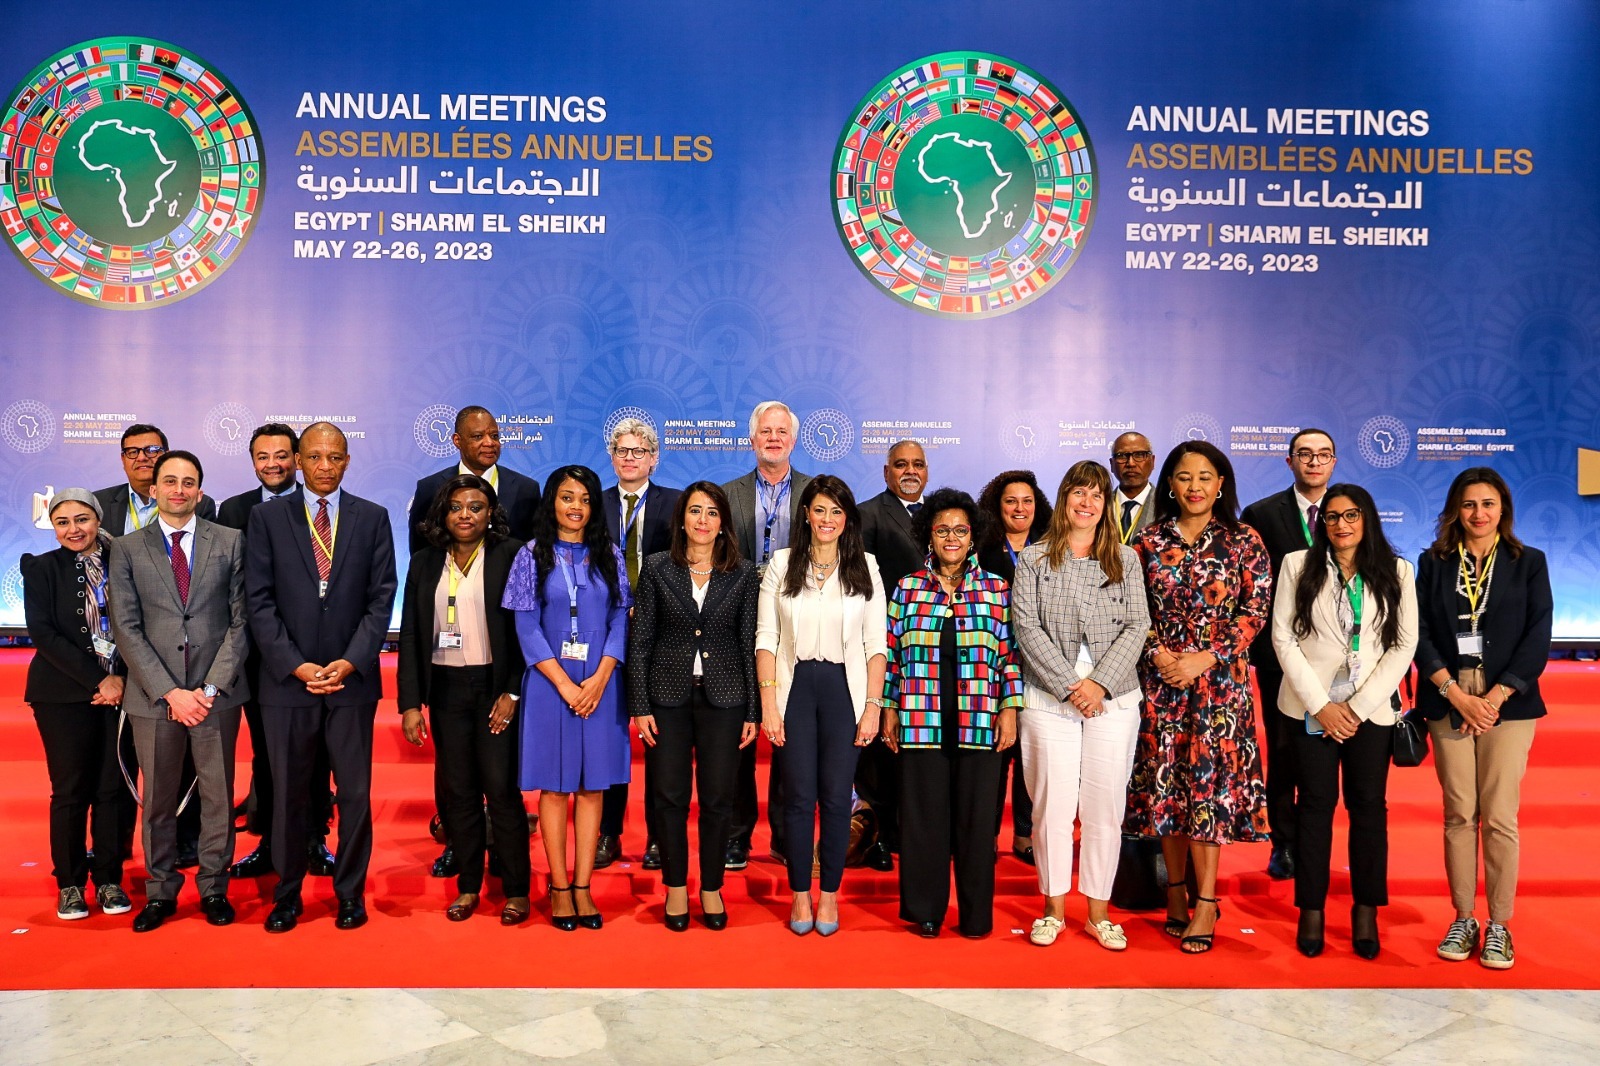 Promoting Economic Integration in Africa through South-South and Triangular Cooperation